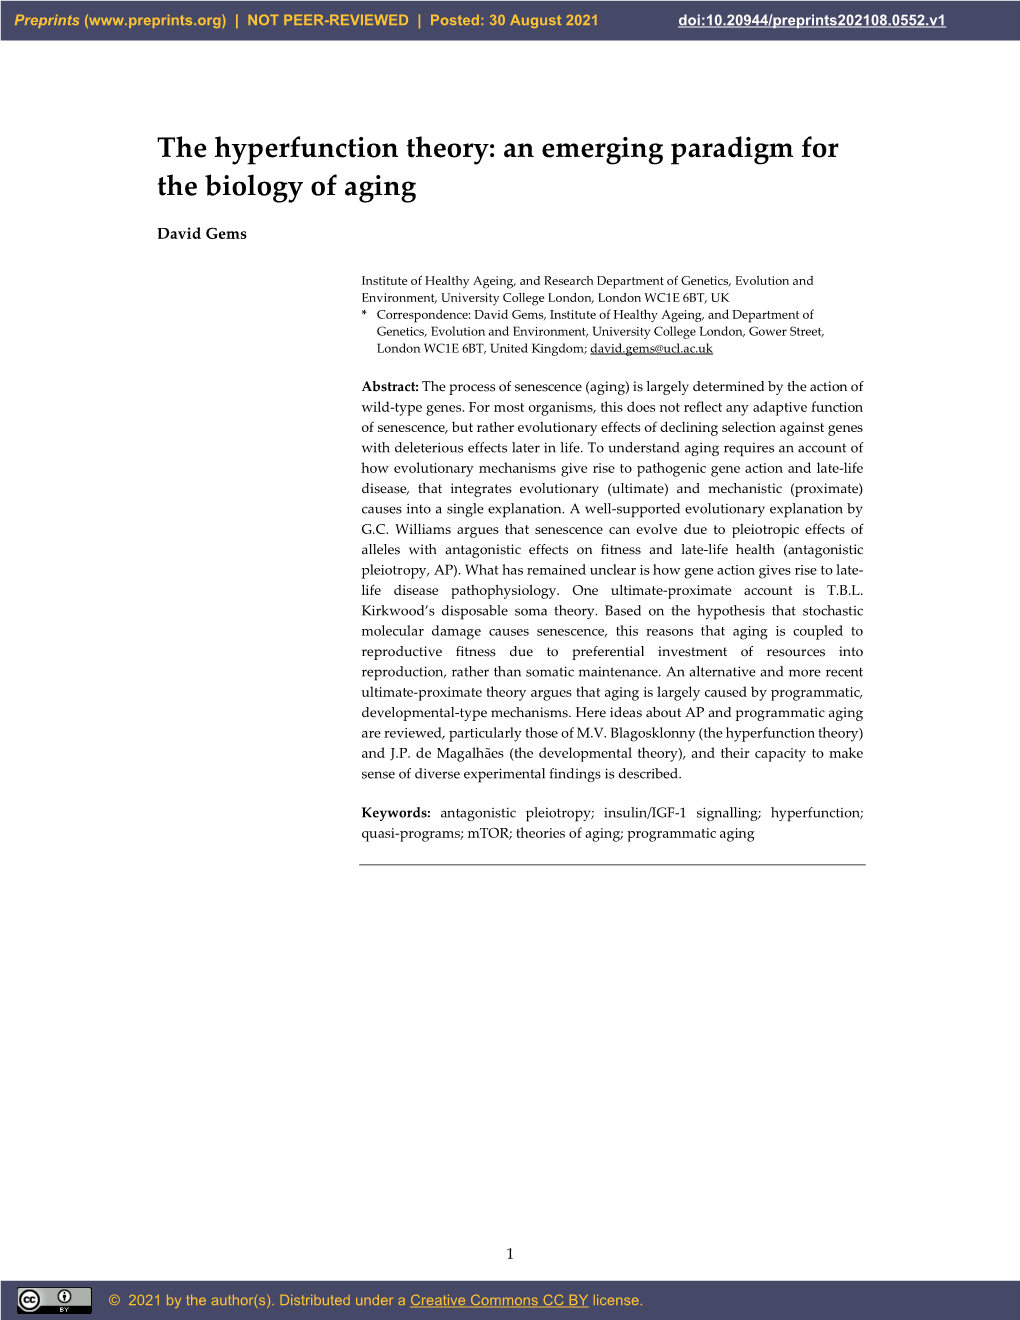 The Hyperfunction Theory: an Emerging Paradigm for the Biology of Aging